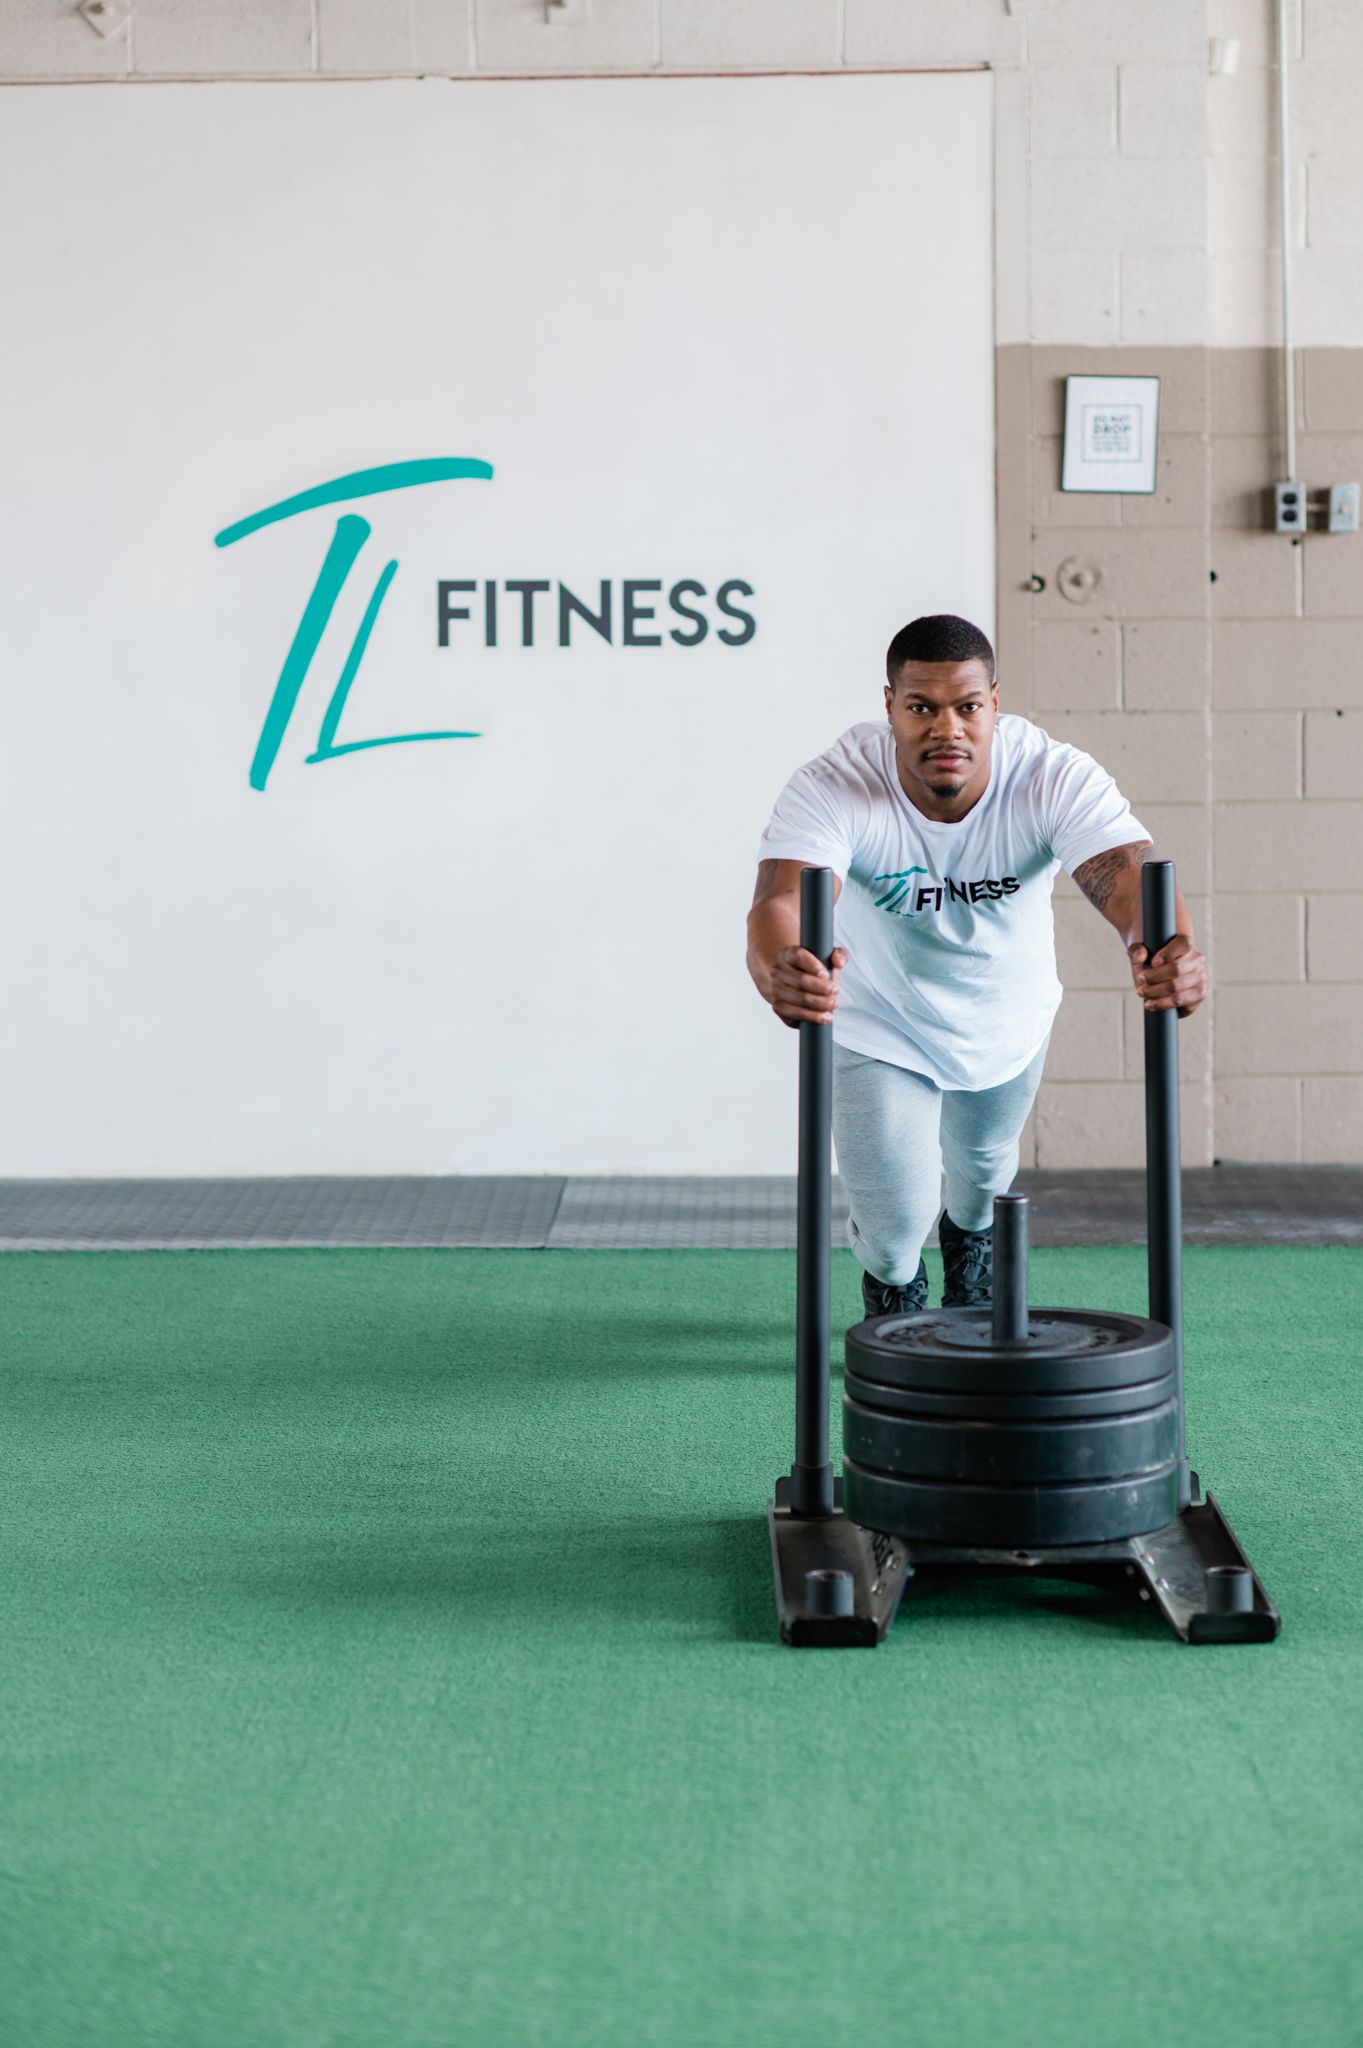 Man looks at camera while pushing weights on a lift forward. In the background there is a wall that reads "TL Fitness."